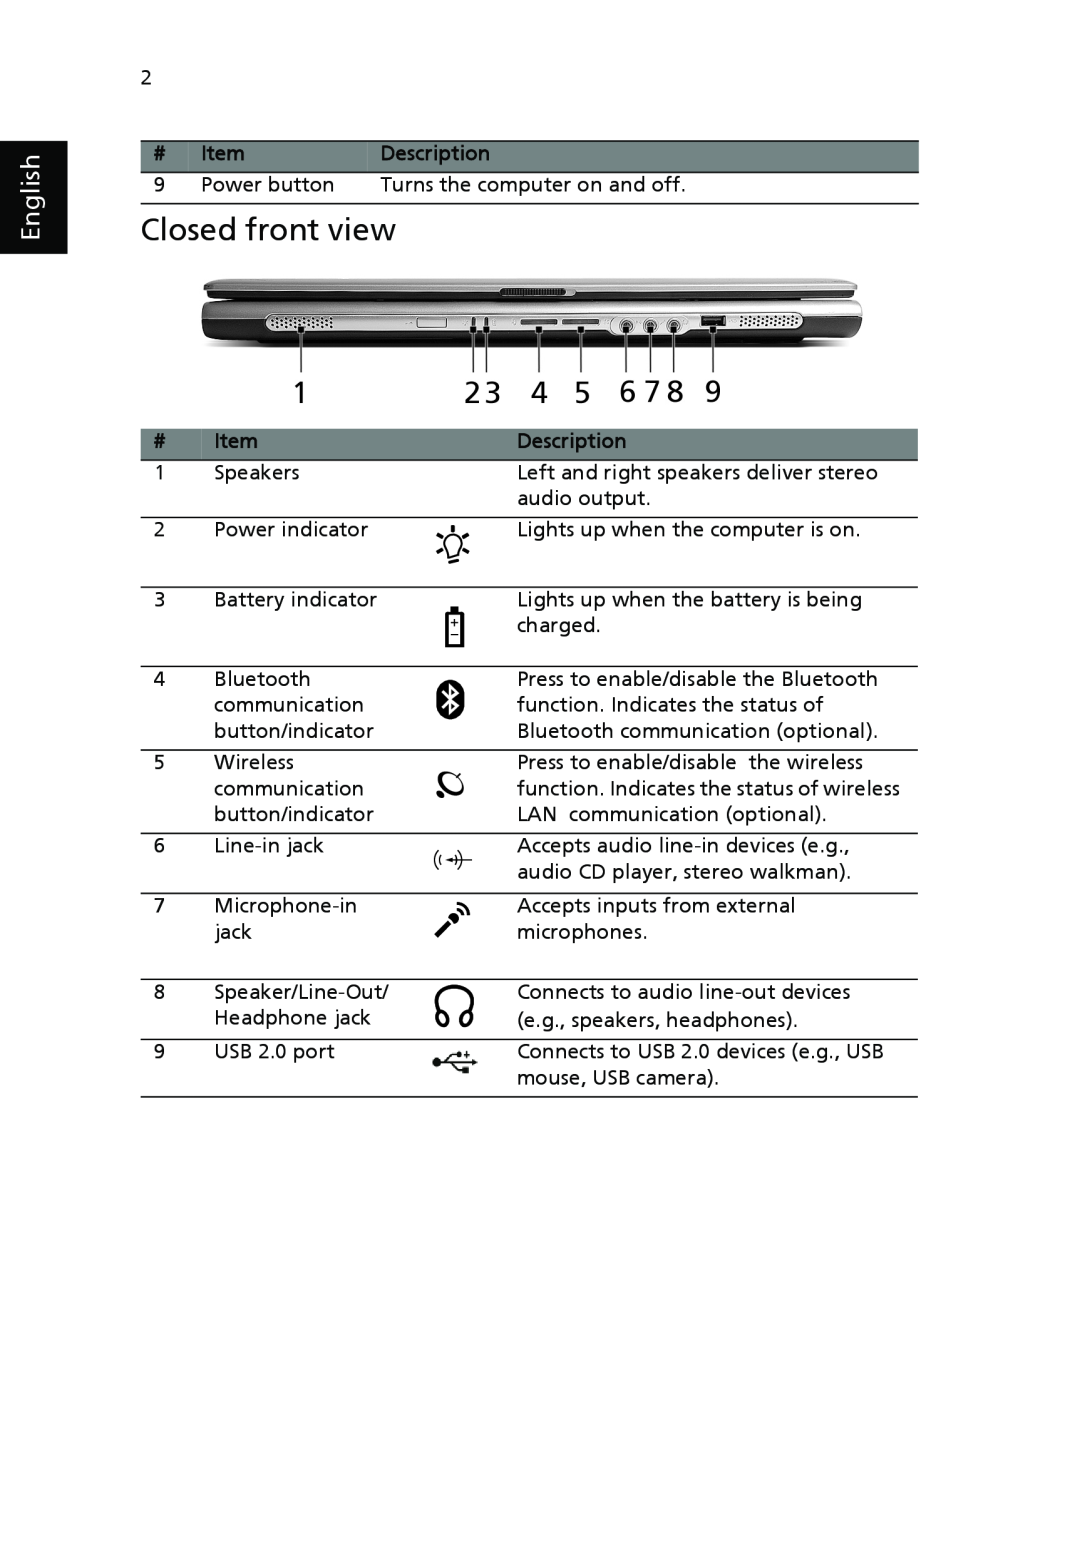 Acer 2310 Series manual Closed front view, English, function. Indicates the status of wireless 